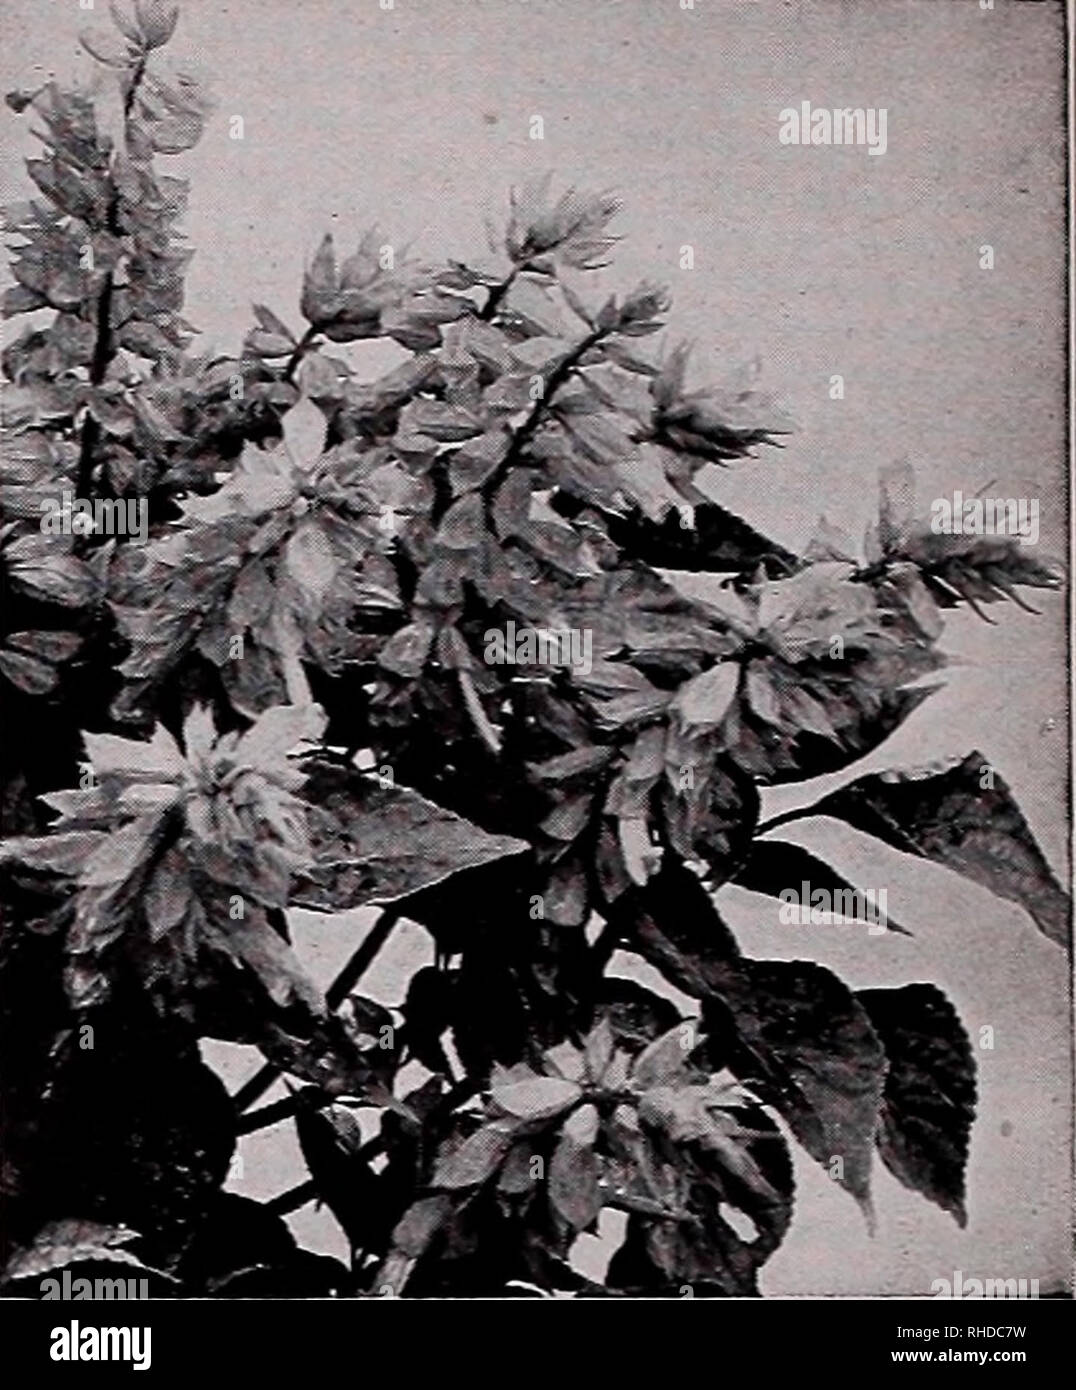 . Book for florists : spring 1935. Flowers Seeds Catalogs; Bulbs (Plants) Seedlings Catalogs; Vegetables Seeds Catalogs; Trees Seeds Catalogs; Horticulture Equipment and supplies Catalogs. 1.00 .50 .50 .50 PRIMULA Obconica Grandiflora Primula Obconi Cfl Trade pkt Gigantea Rosea. Fine ^2 oz., $1.80 $0.50 Salmon Queen. 8 in Ifa oz., 1.80 Mixed &amp;oz., 1.50 Grandiflora Alba. White {± oz., 1.50 Appleblossom. Pink &quot;Better Days. ' A new color—deep carmine red. The darkest and most pleasing Primula Obcon- ica Grandiflora yet produced. Very large flower- ing and an important rival to Fassbend Stock Photo